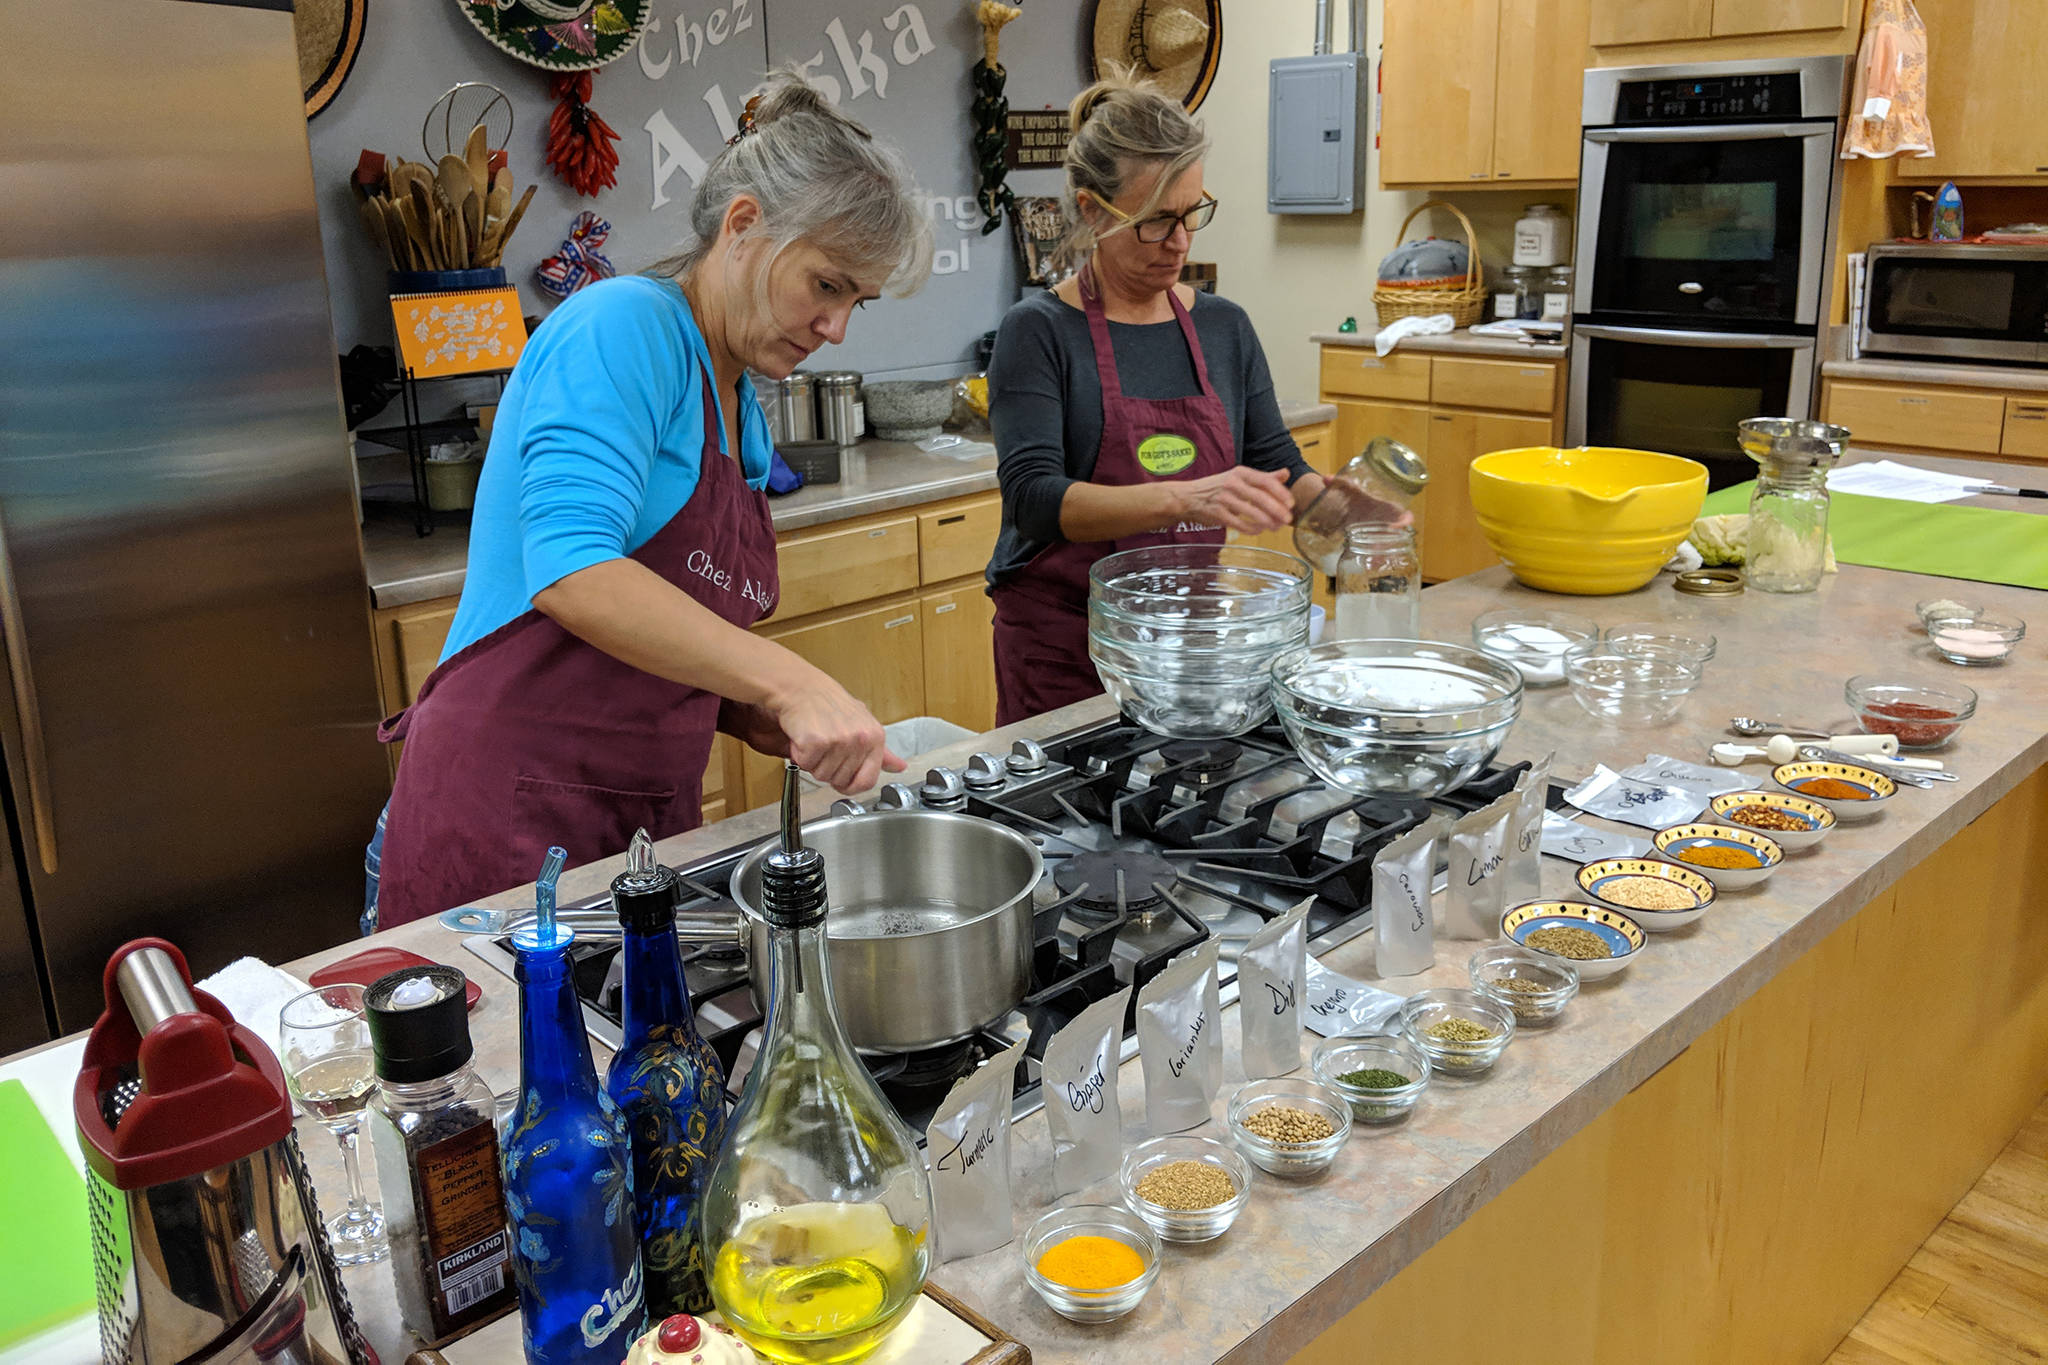 Julie Hamilton, assistant professor of accounting for University of Alaska Southeast, and Julie O’Brien, owner of Firefly Kitchens, ready equipment and ingredients for a fermented foods demonstration. Fermentation 101 was a UAS Alumni and Friends Association event that gave those in attendance hands-on practice with fermented foods Friday, Nov. 9 at Chez Alaska Cooking School. (Ben Hohenstatt | Capital City Weekly)